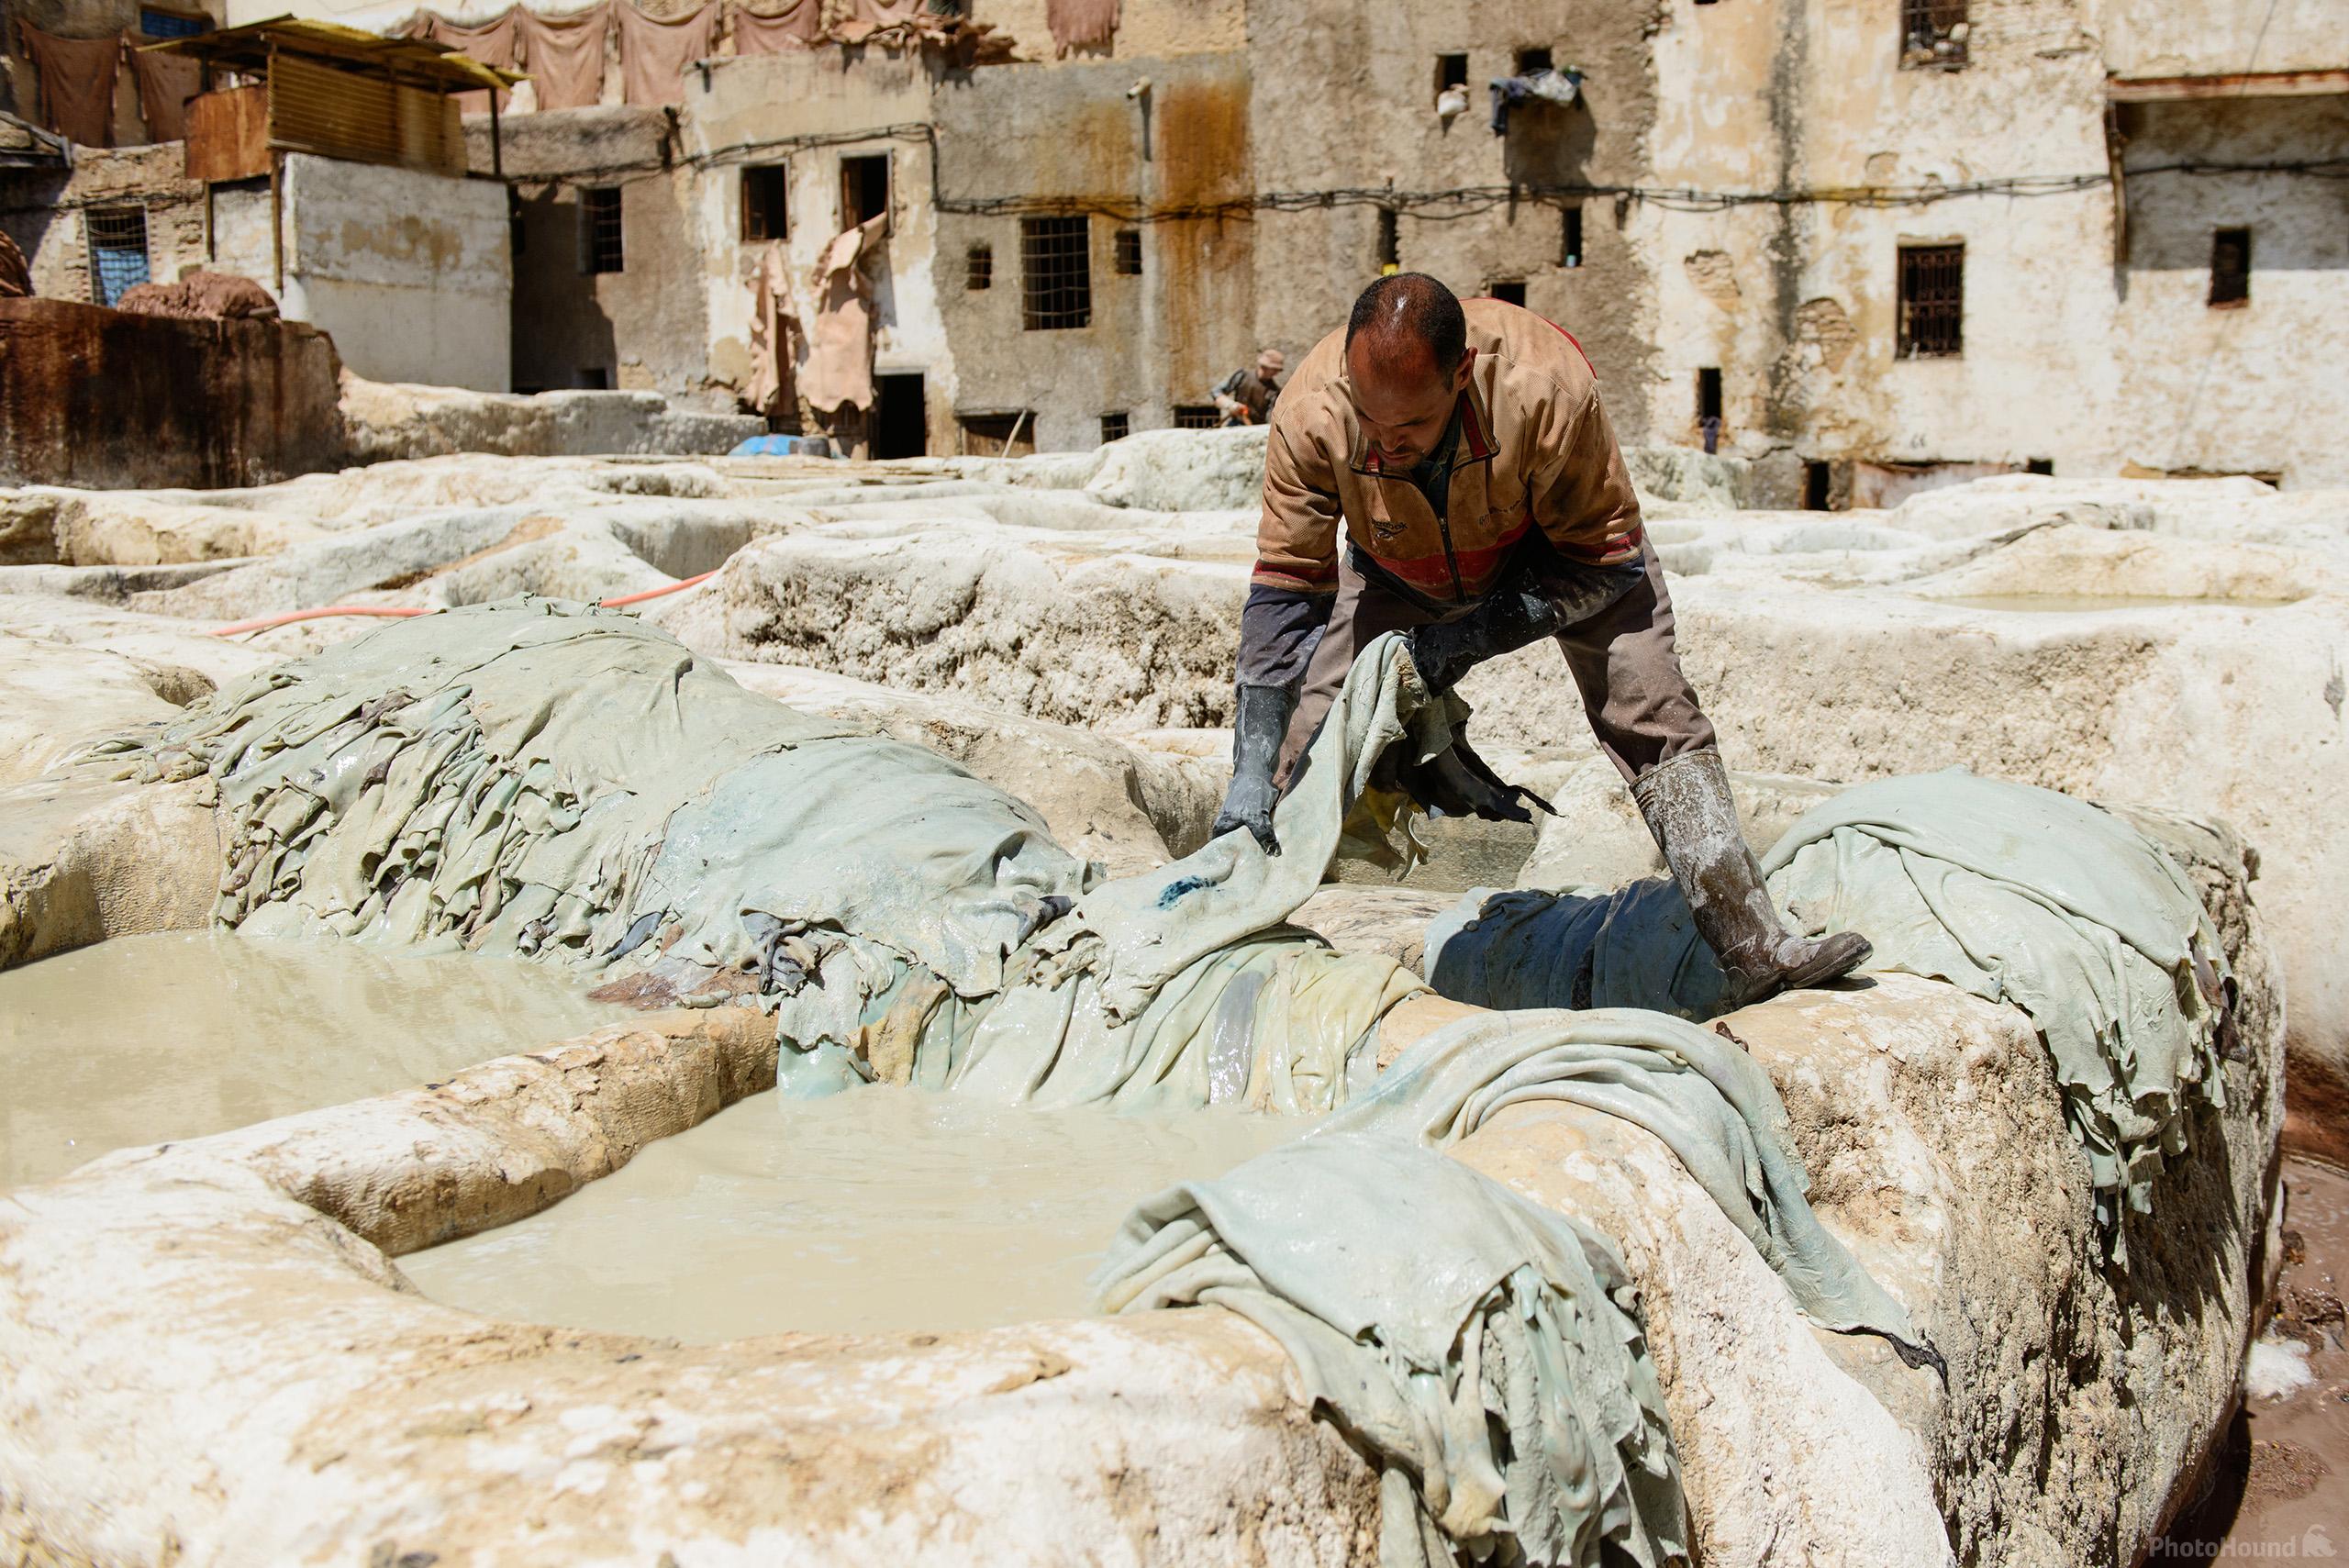 Image of Fes Tanneries by Luka Esenko